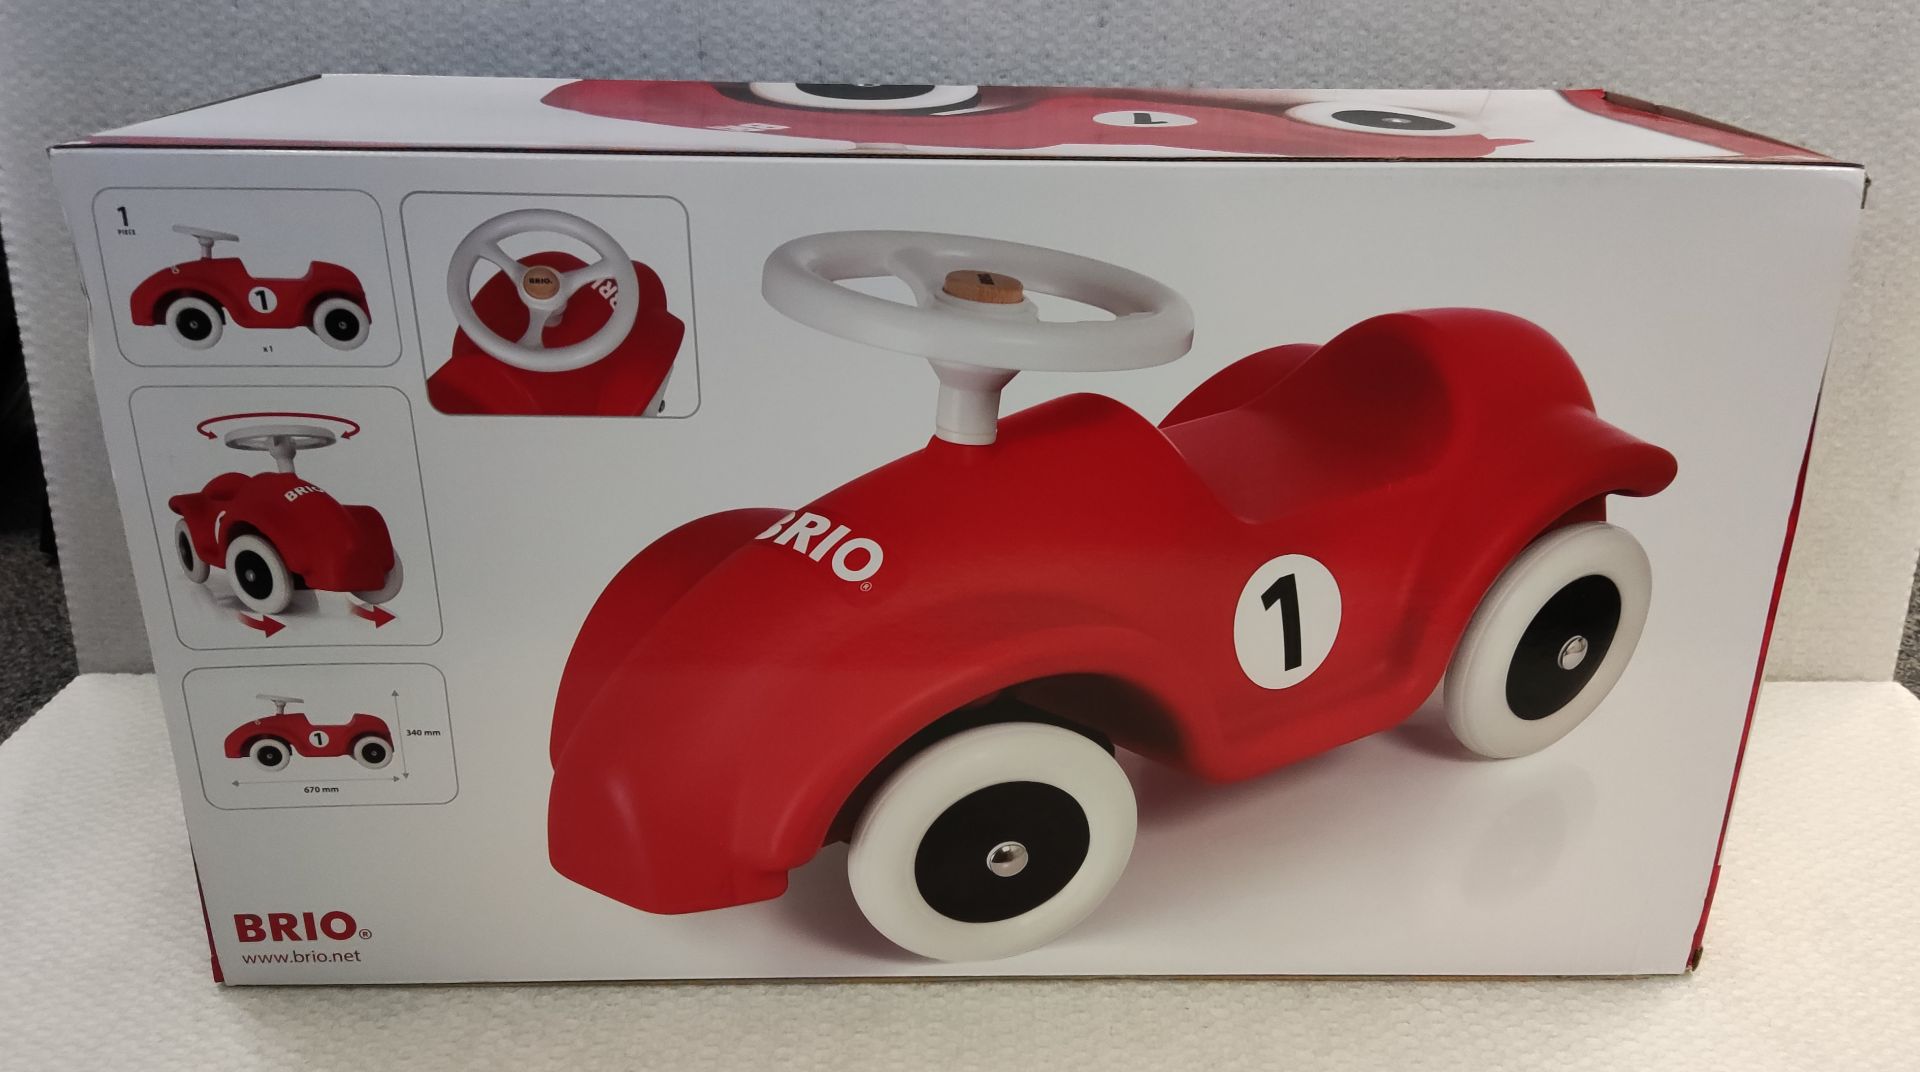 1 x Brio Ride On Race Car - Model 30285 - New/Boxed - Image 5 of 8